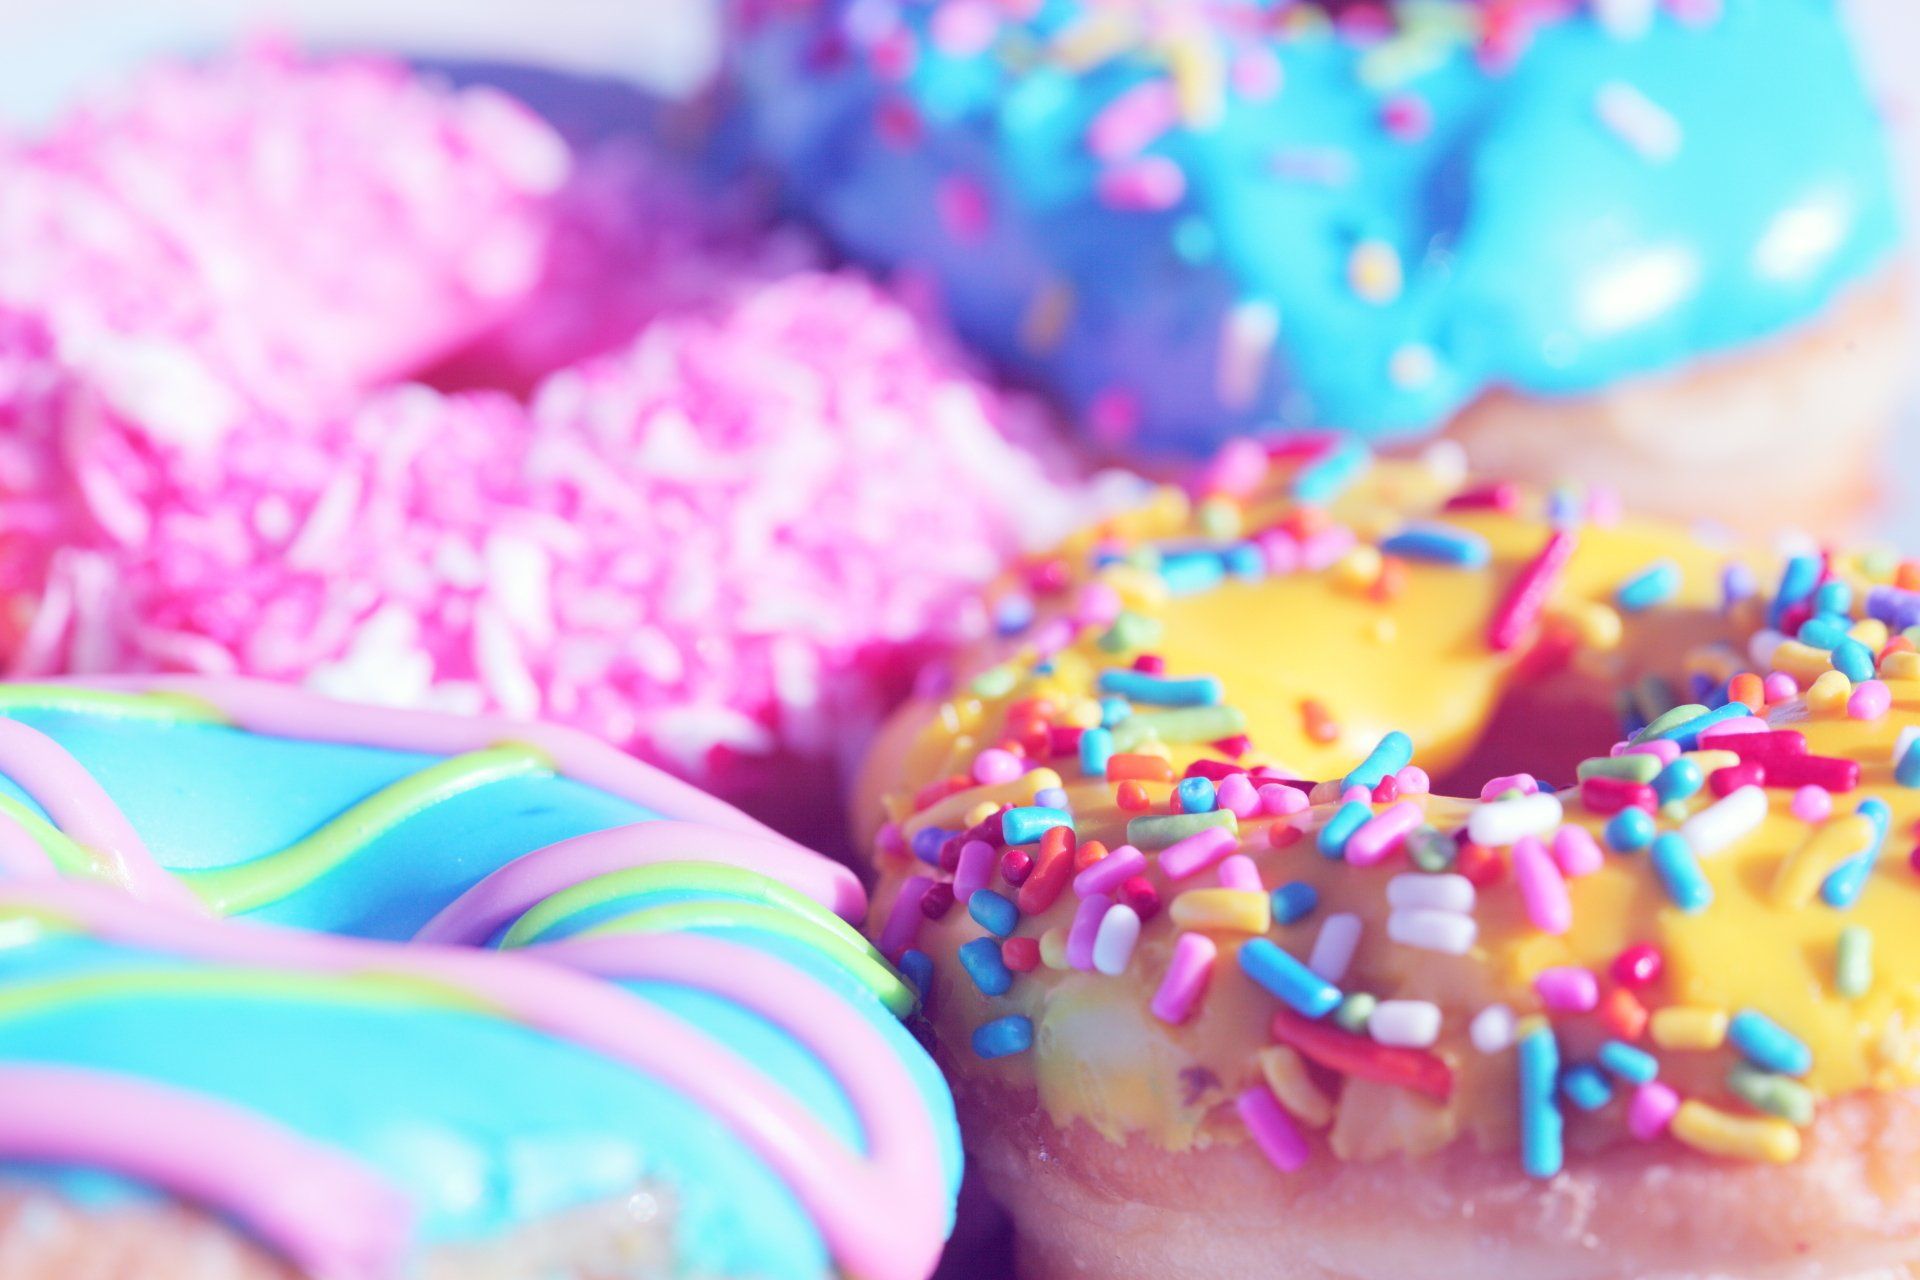 A bunch of colorful donuts with sprinkles on them